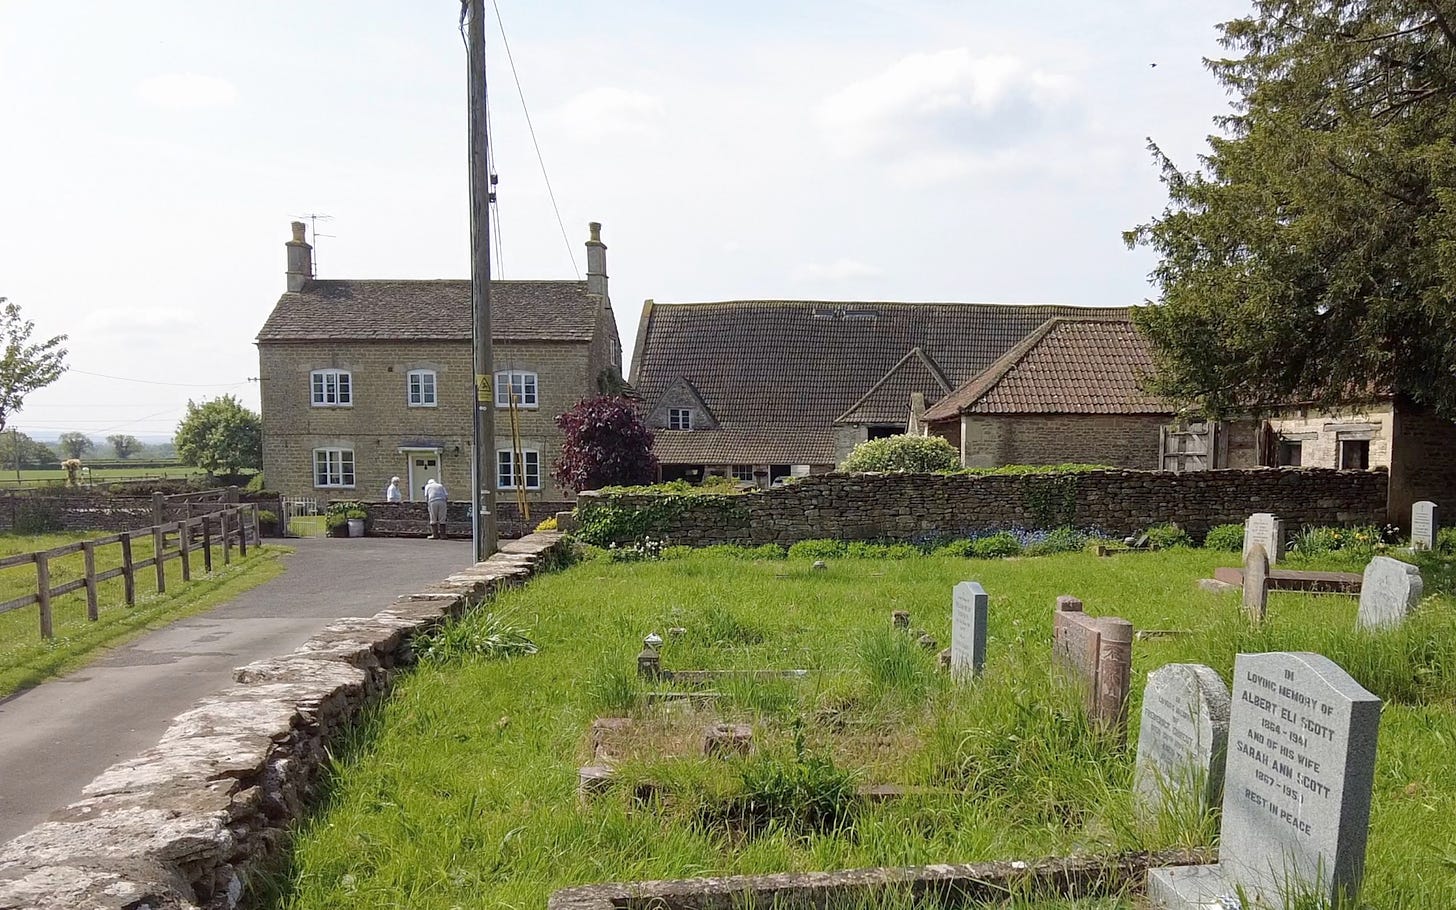 Church Farm and the medieval barn to its right. In the foreground are some of the graves in the churchyard. Image: Roland's Travels